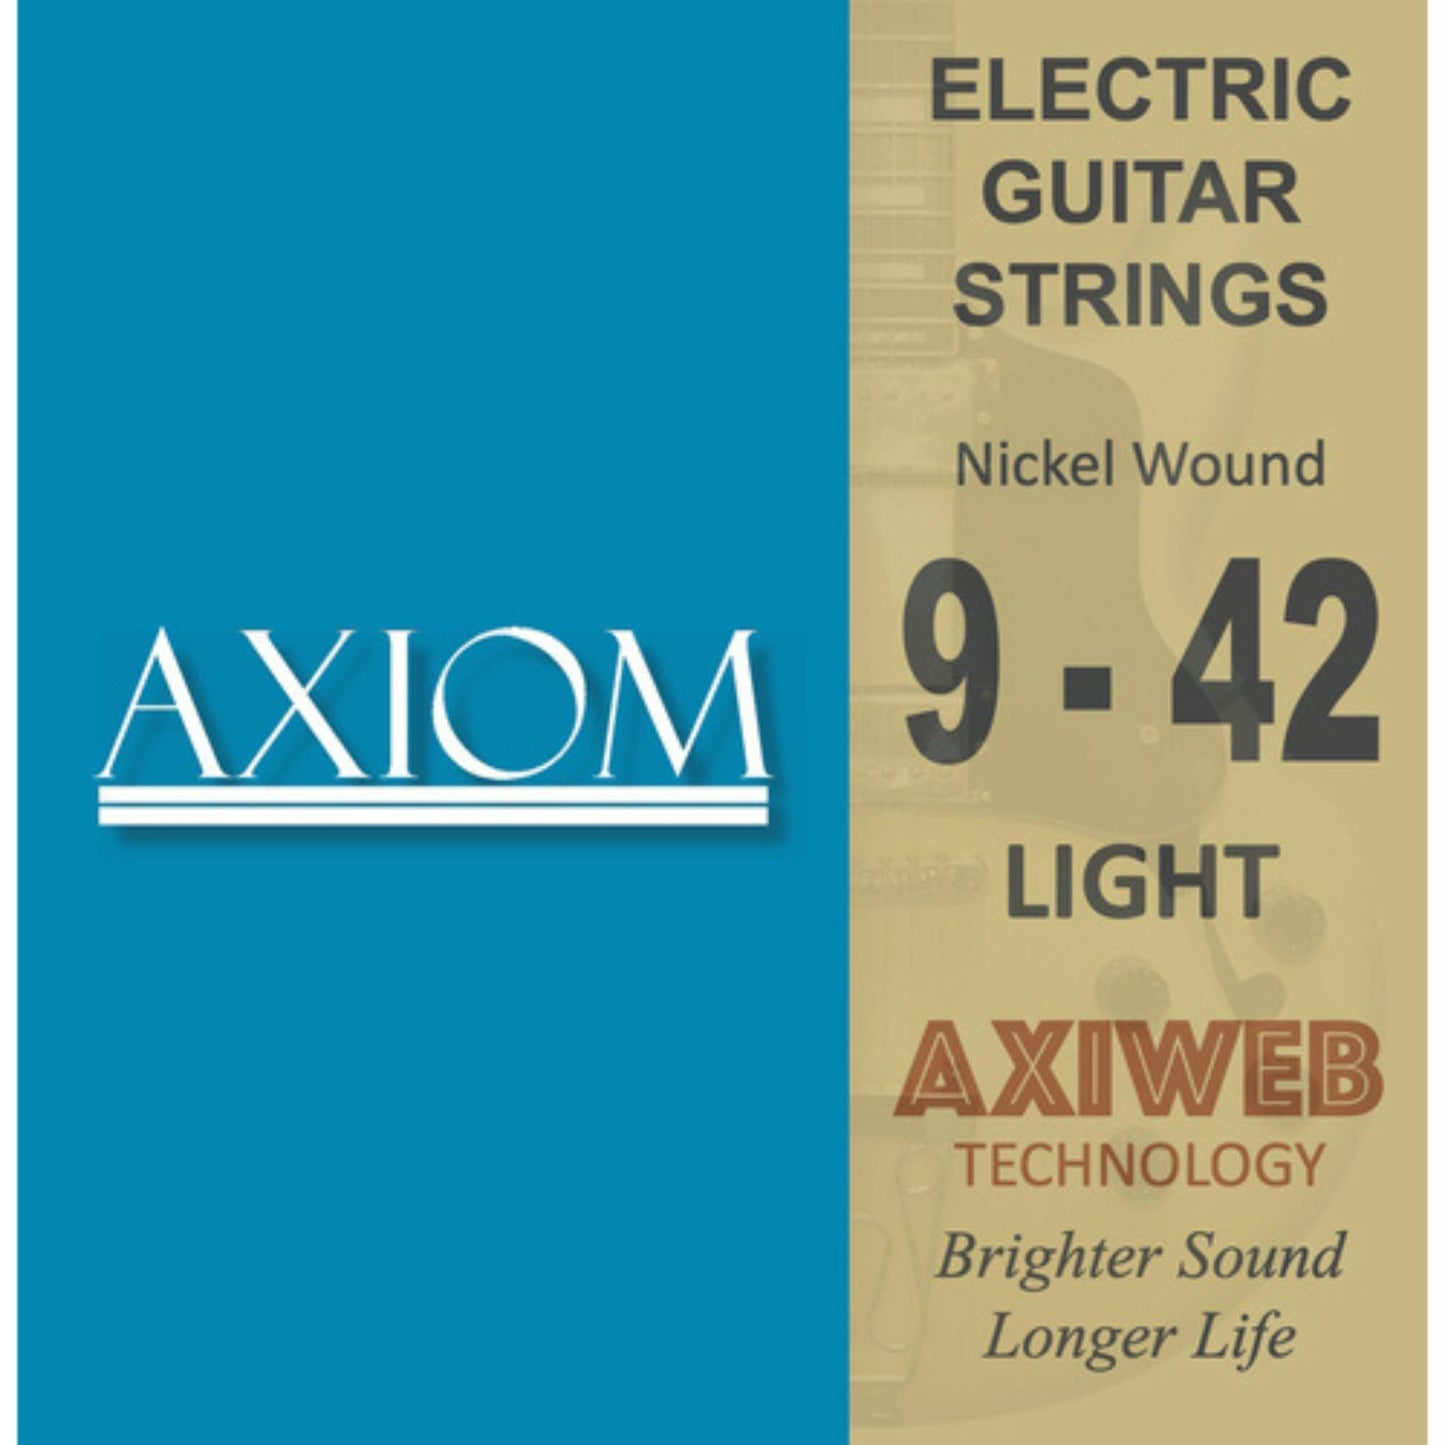 Axiom Axi-Web Coated Electric Guitar strings - Light